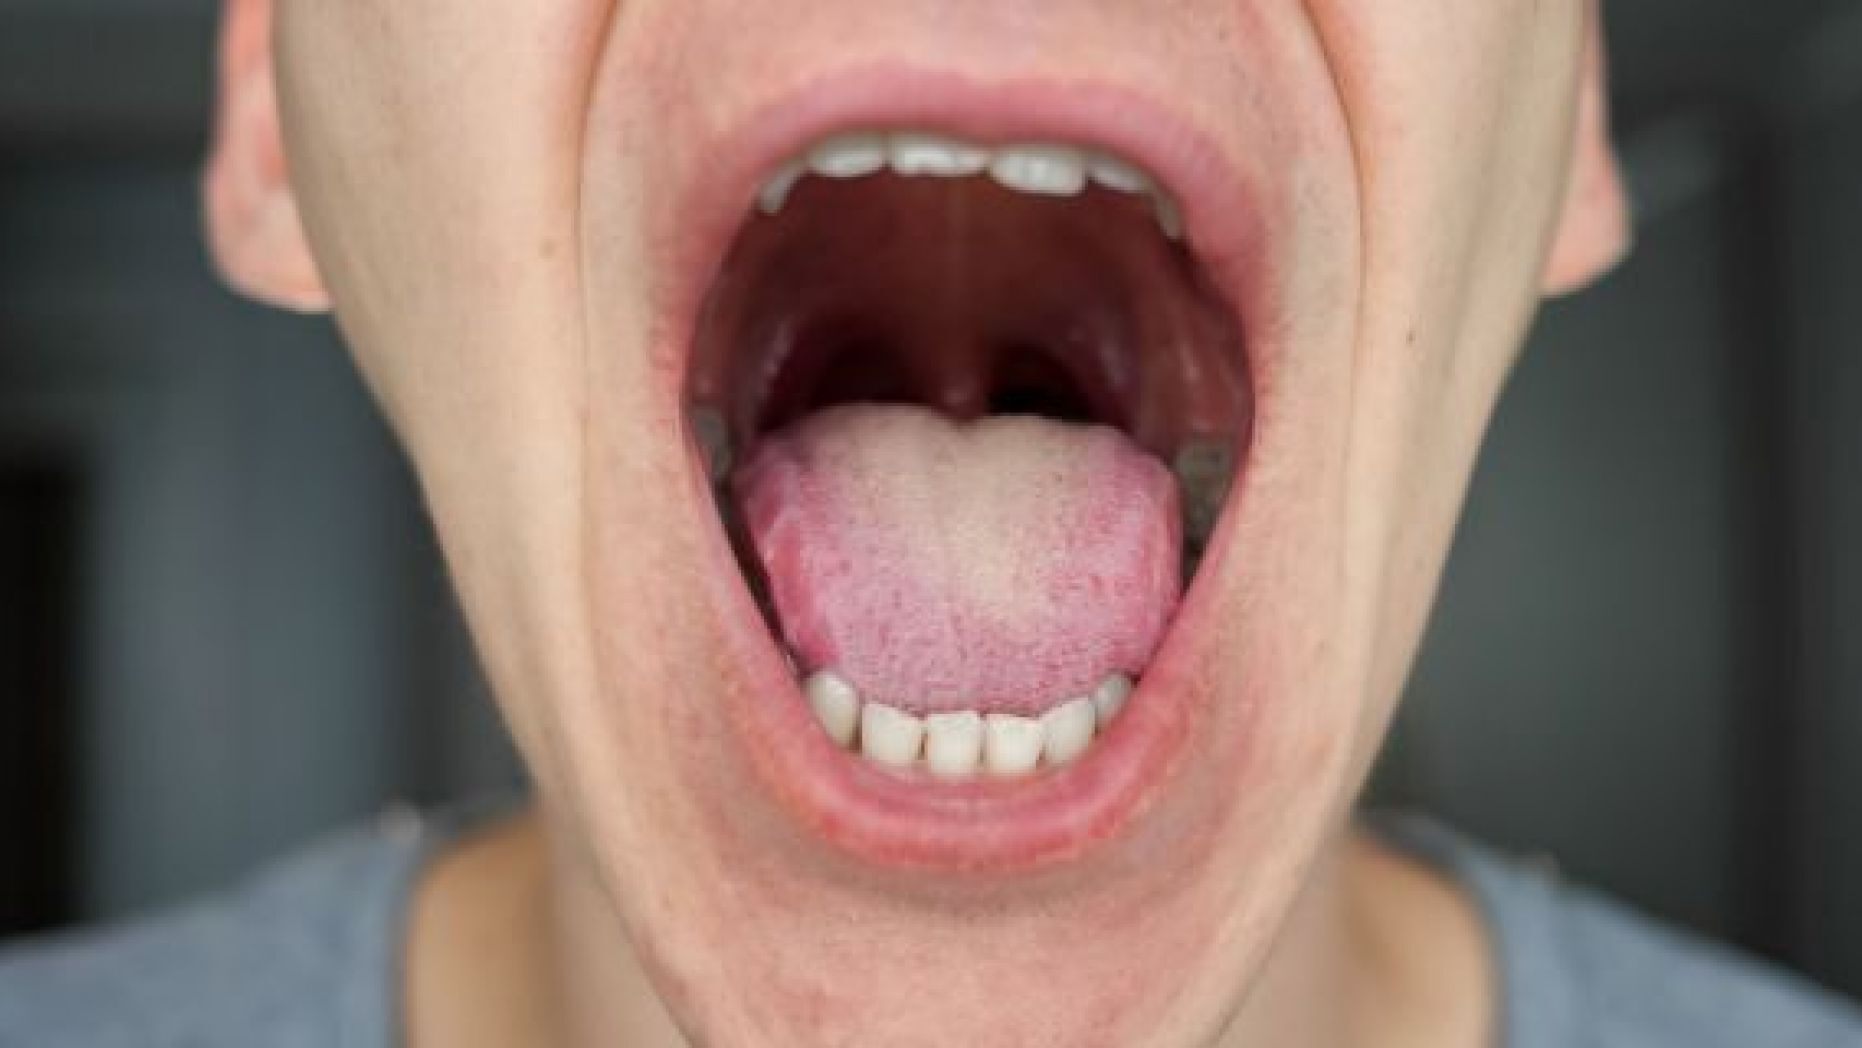 His tongue's strange appearance would turn out to be a sign of an underlying blood condition that required a relatively simple treatment,